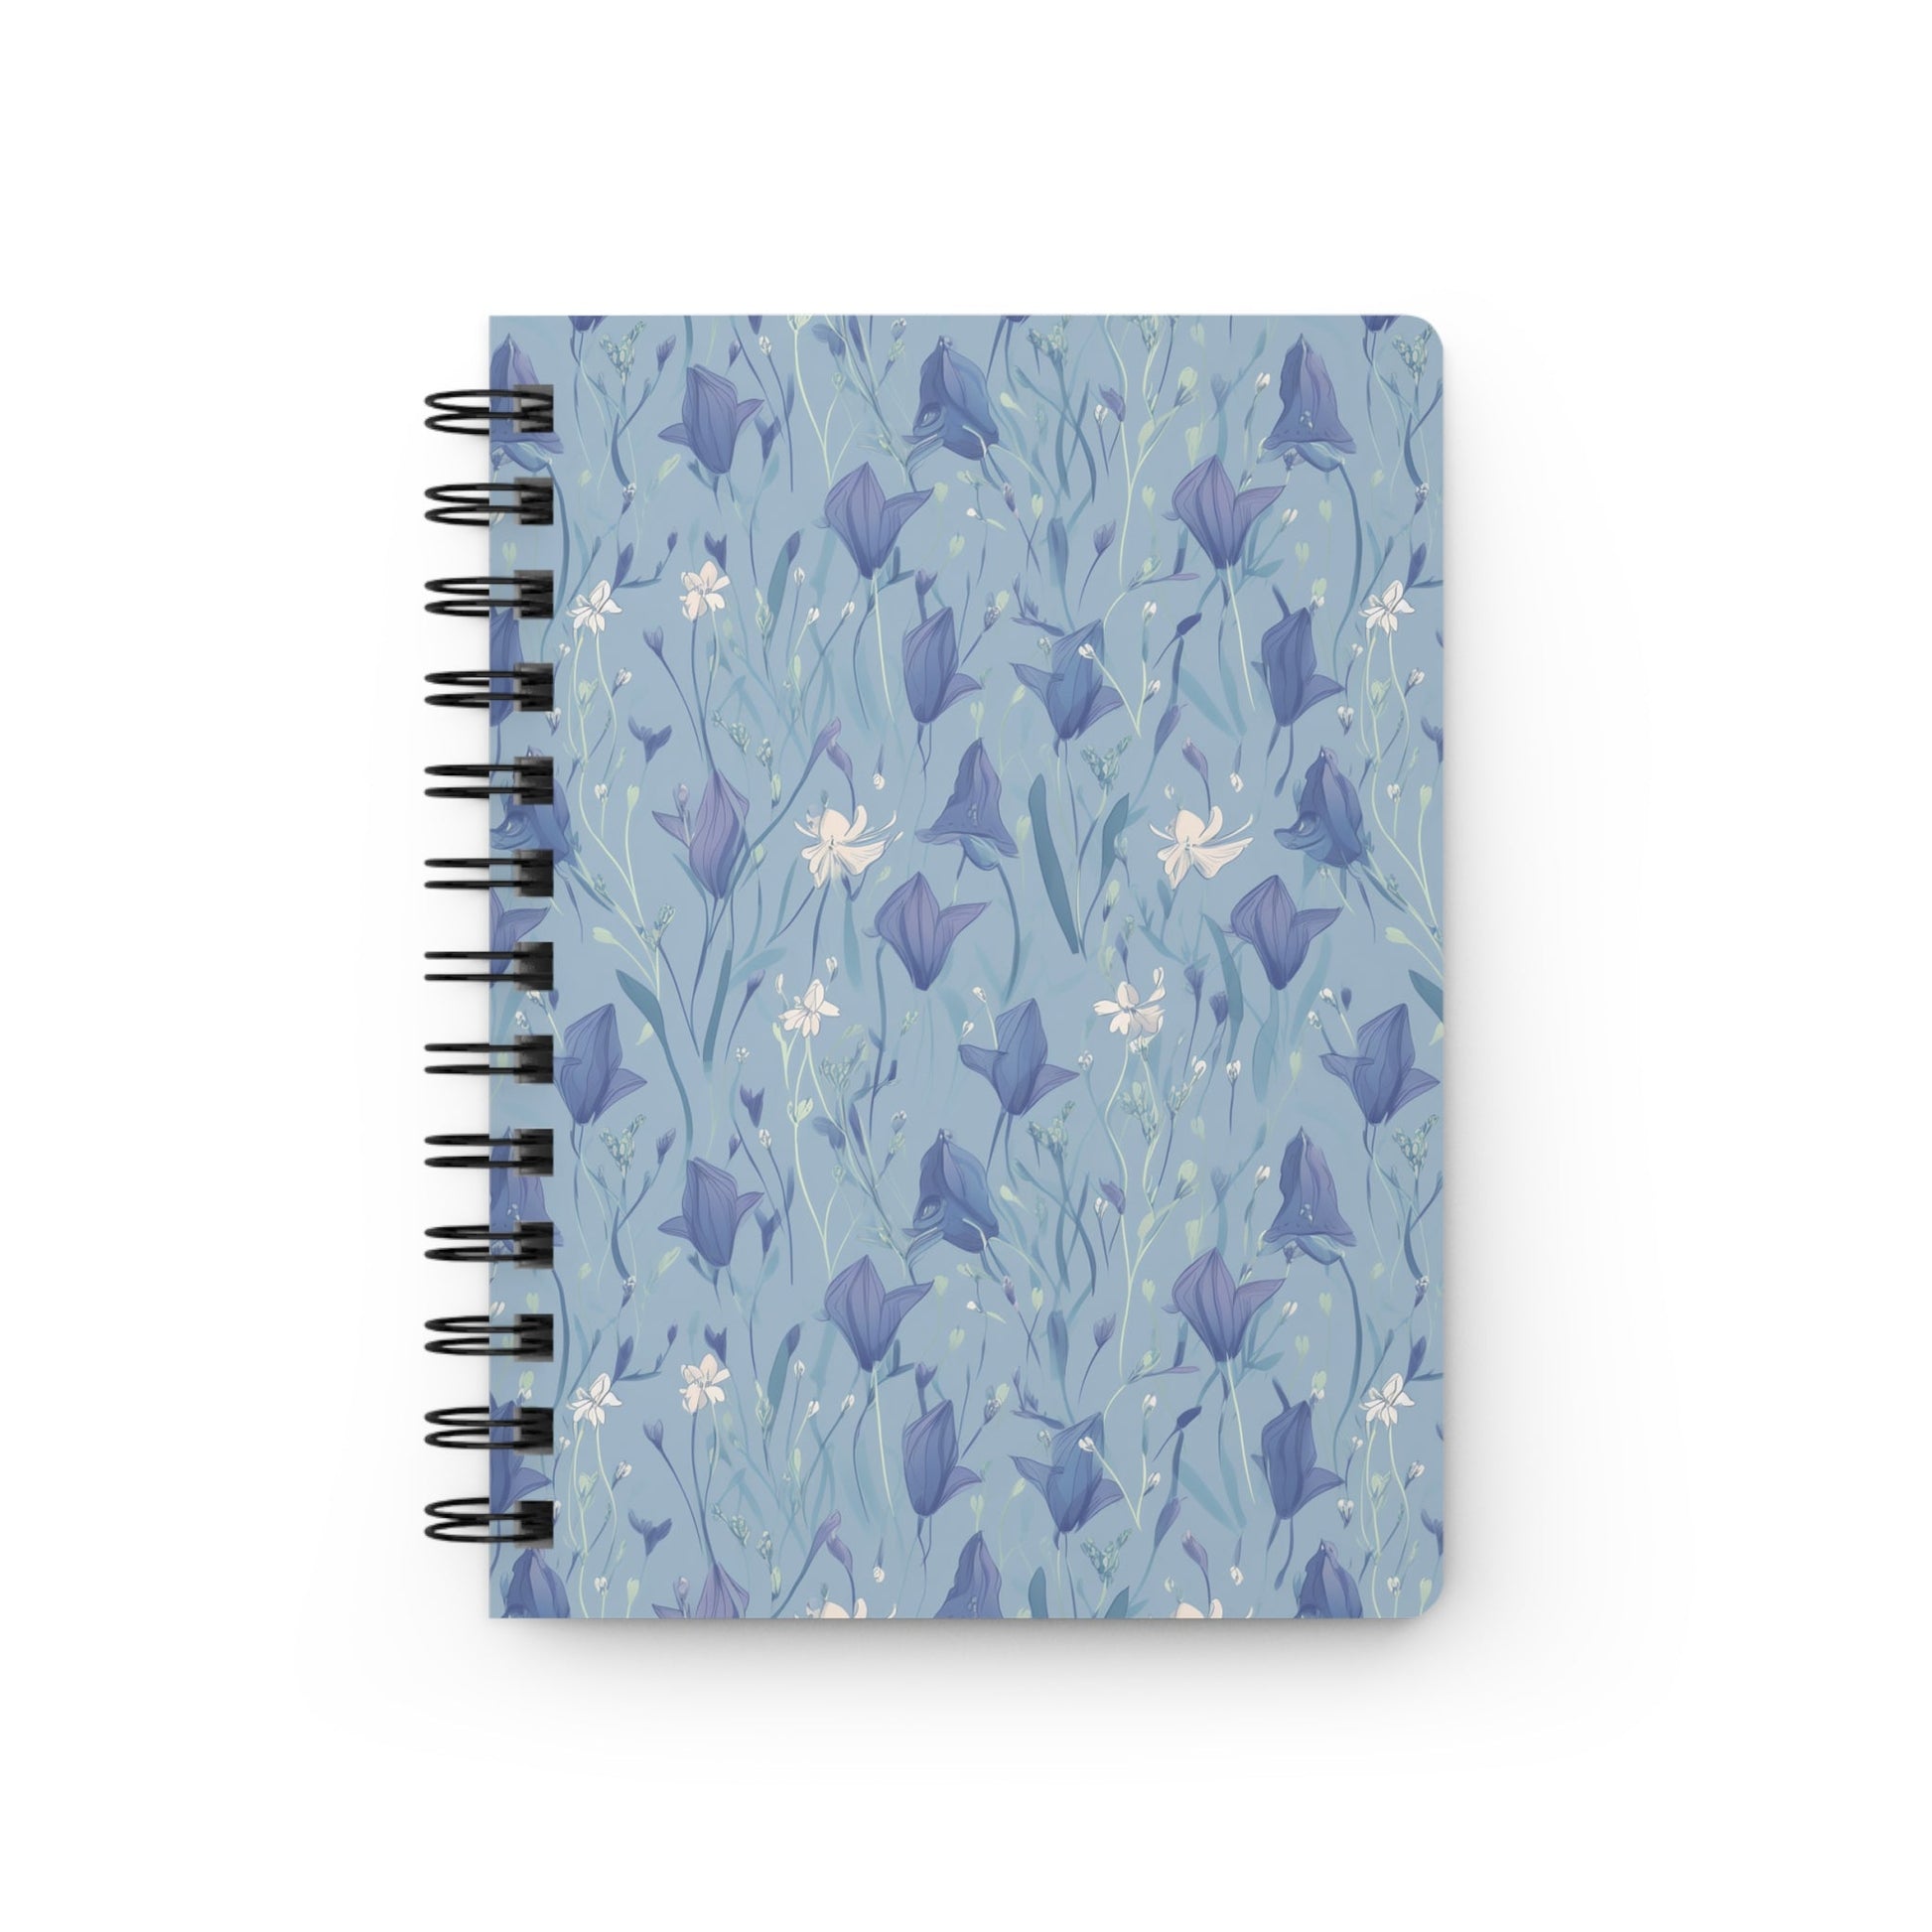 Enchanting Bluebell Harmony Spiral Notebook - Lined Pages with Delicate Floral Cover Paper products Pattern Symphony   